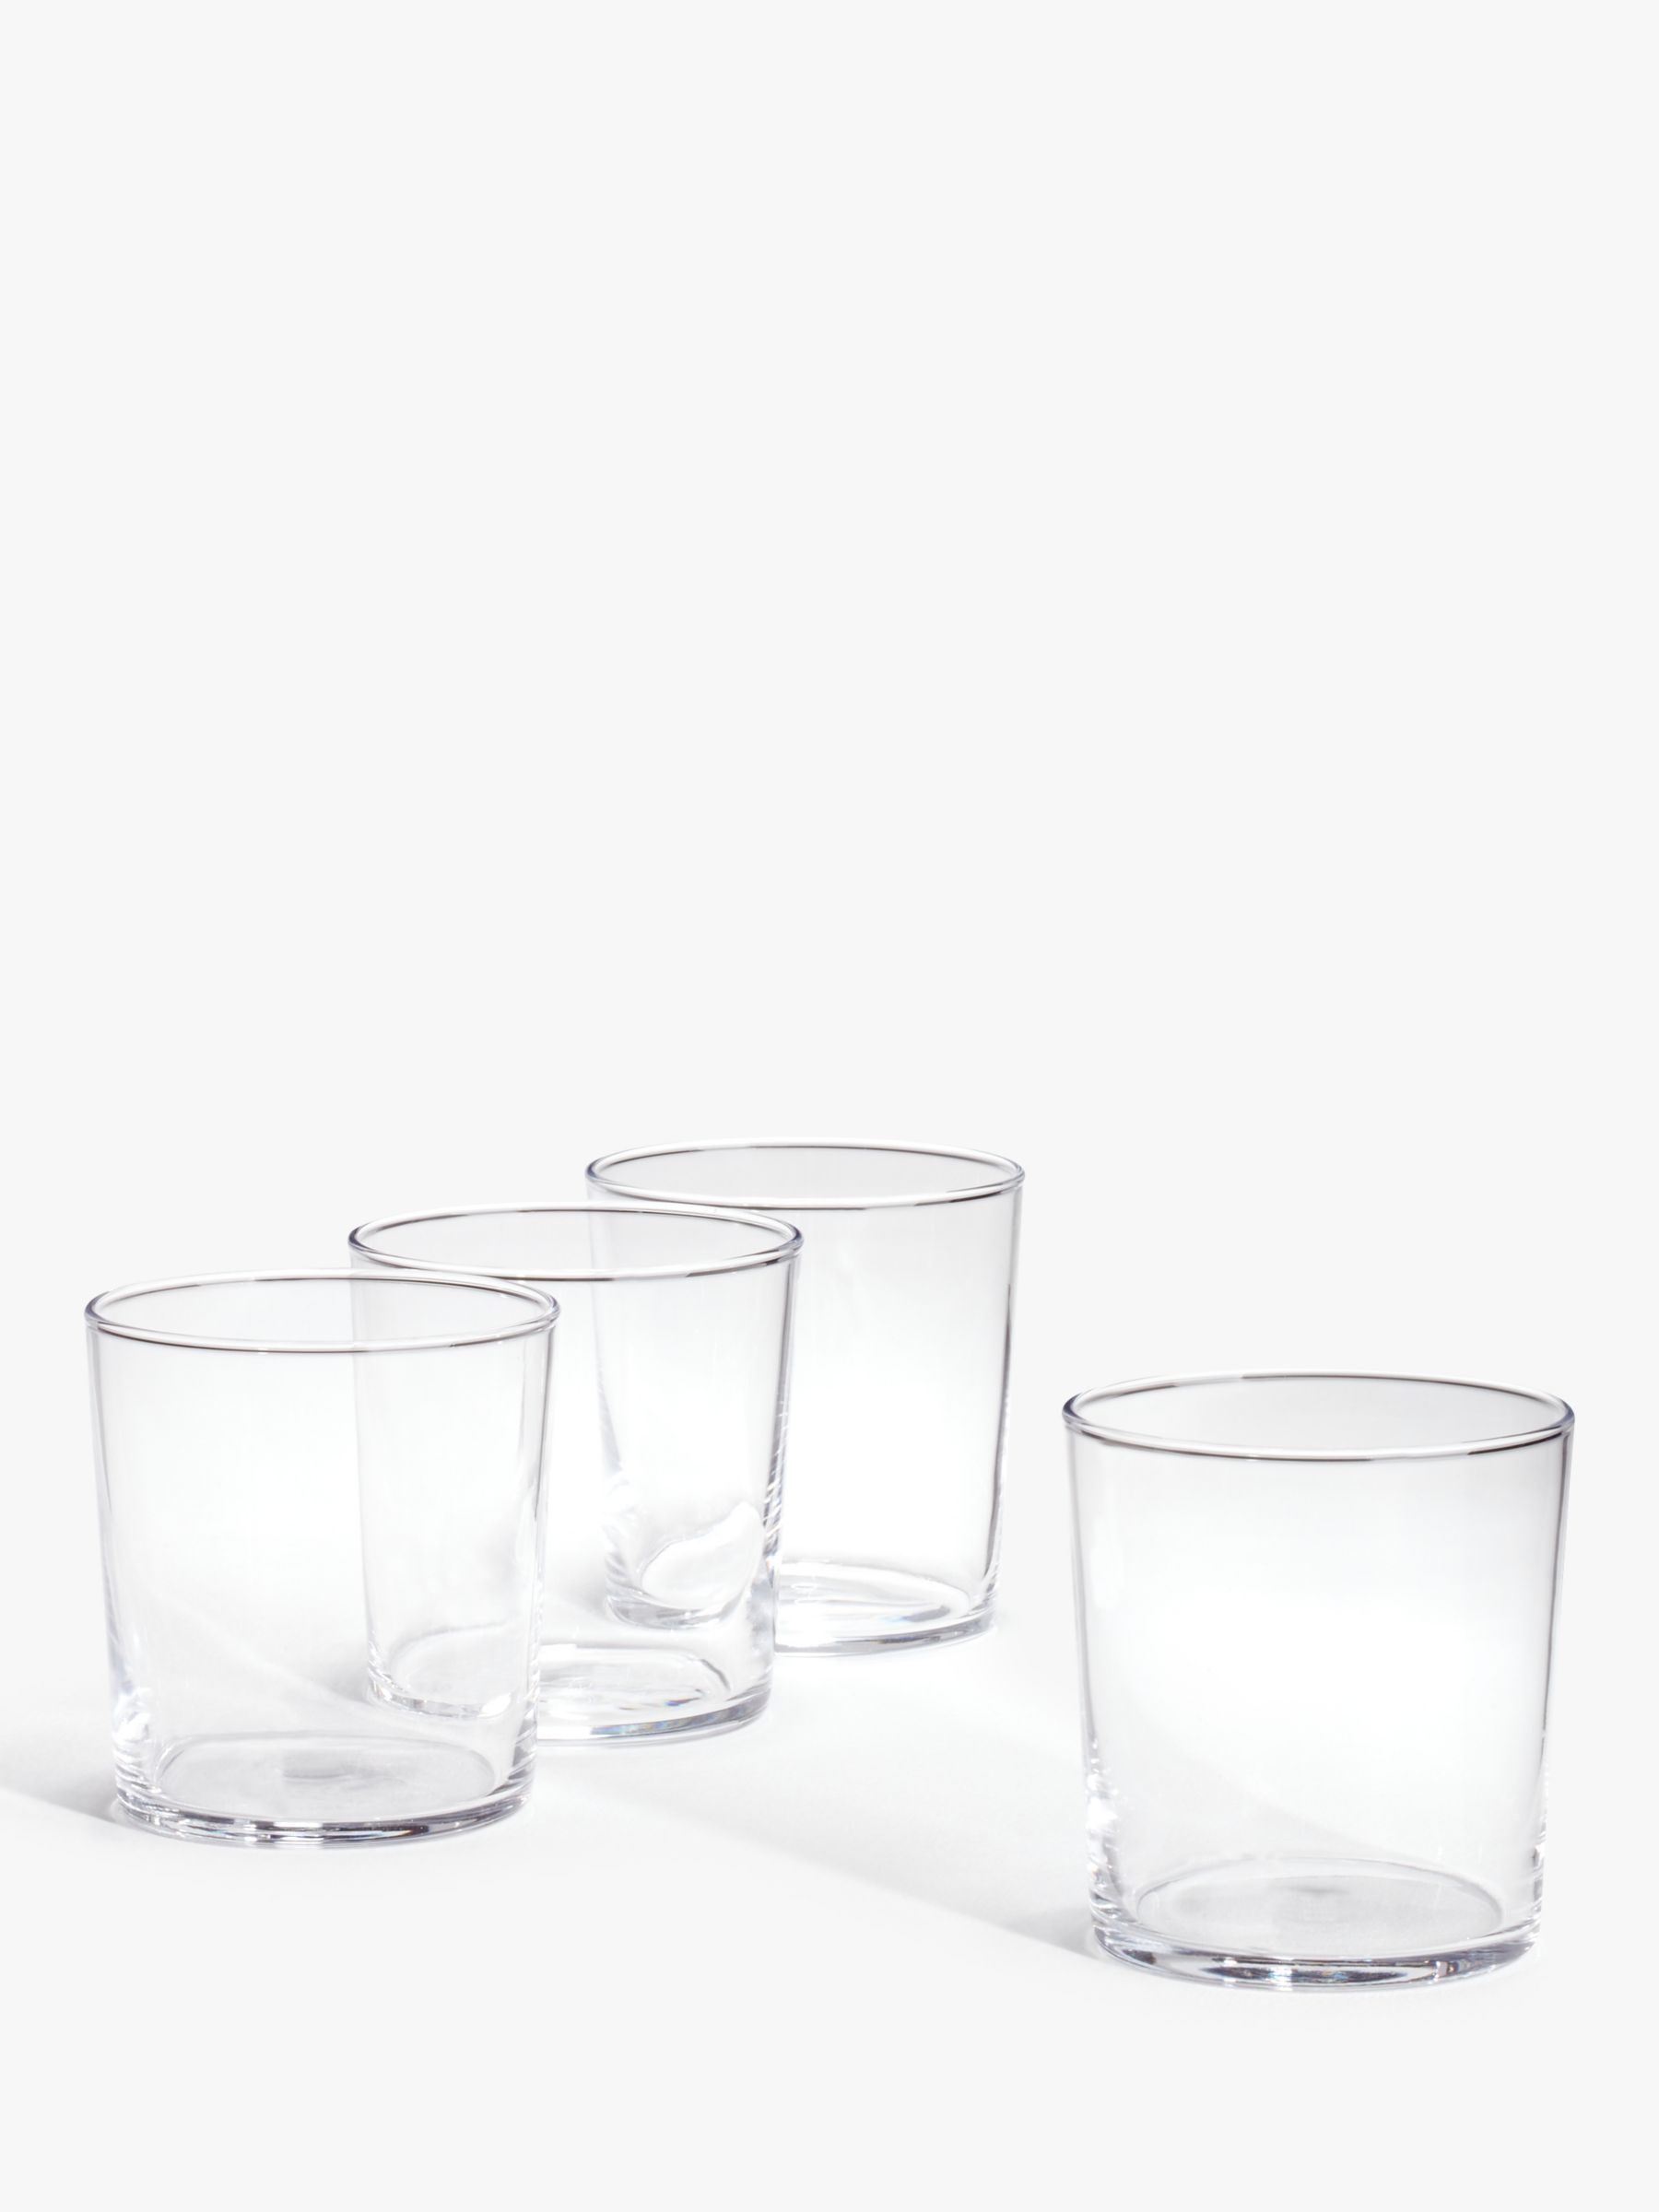 John Lewis ANYDAY Dine Shot Glass, Set of 4, 100ml, Clear